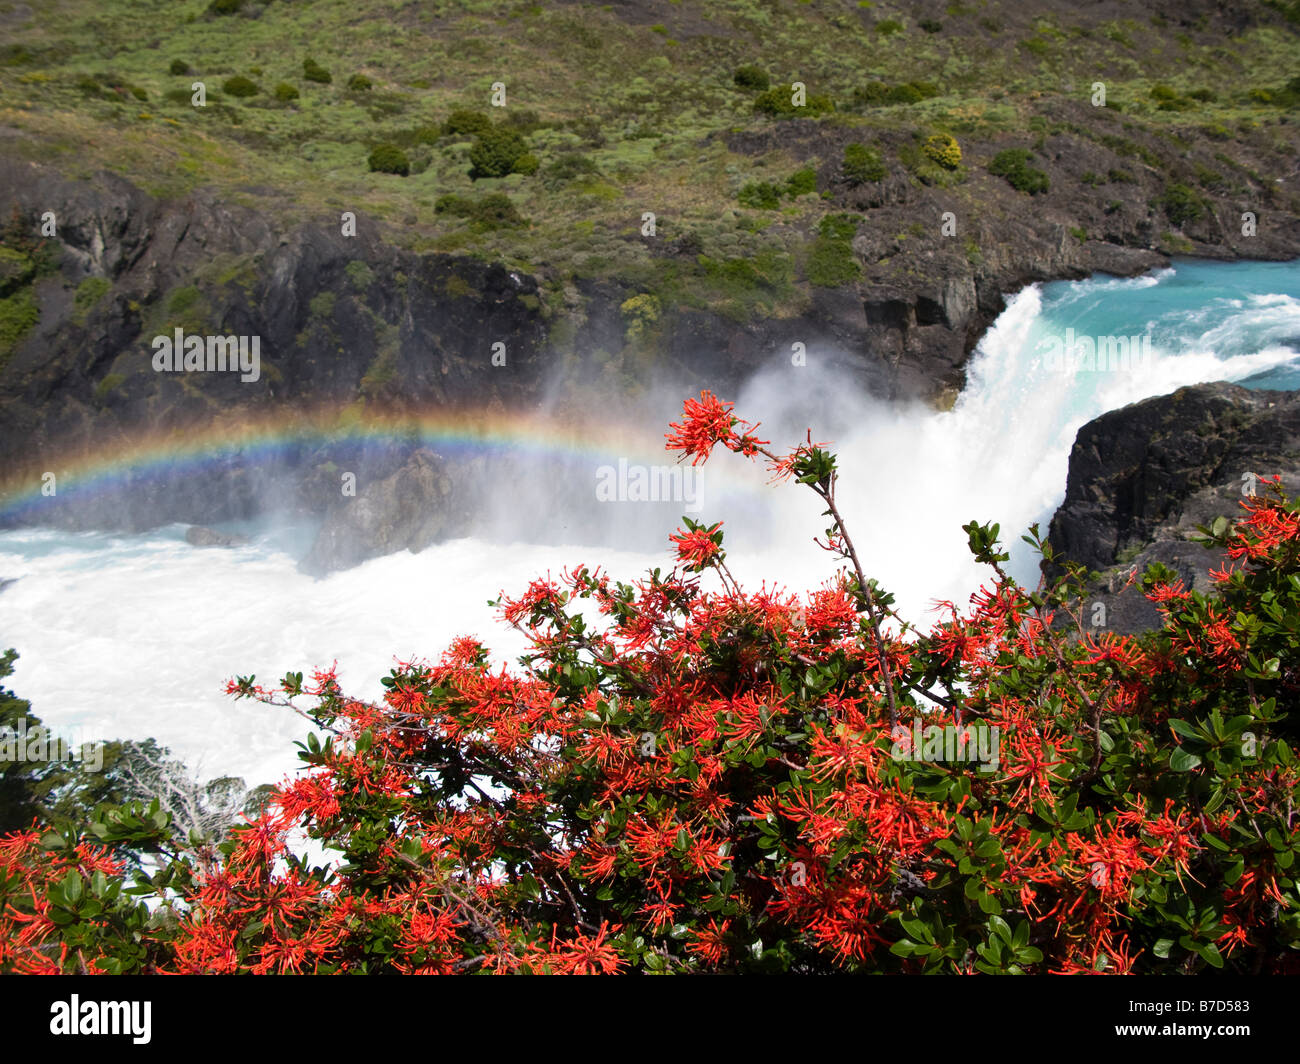 Rainbow and firebush at Salto Grande Waterfall, Torres del Paine National Park, Patagonia, Chile,South America Stock Photo